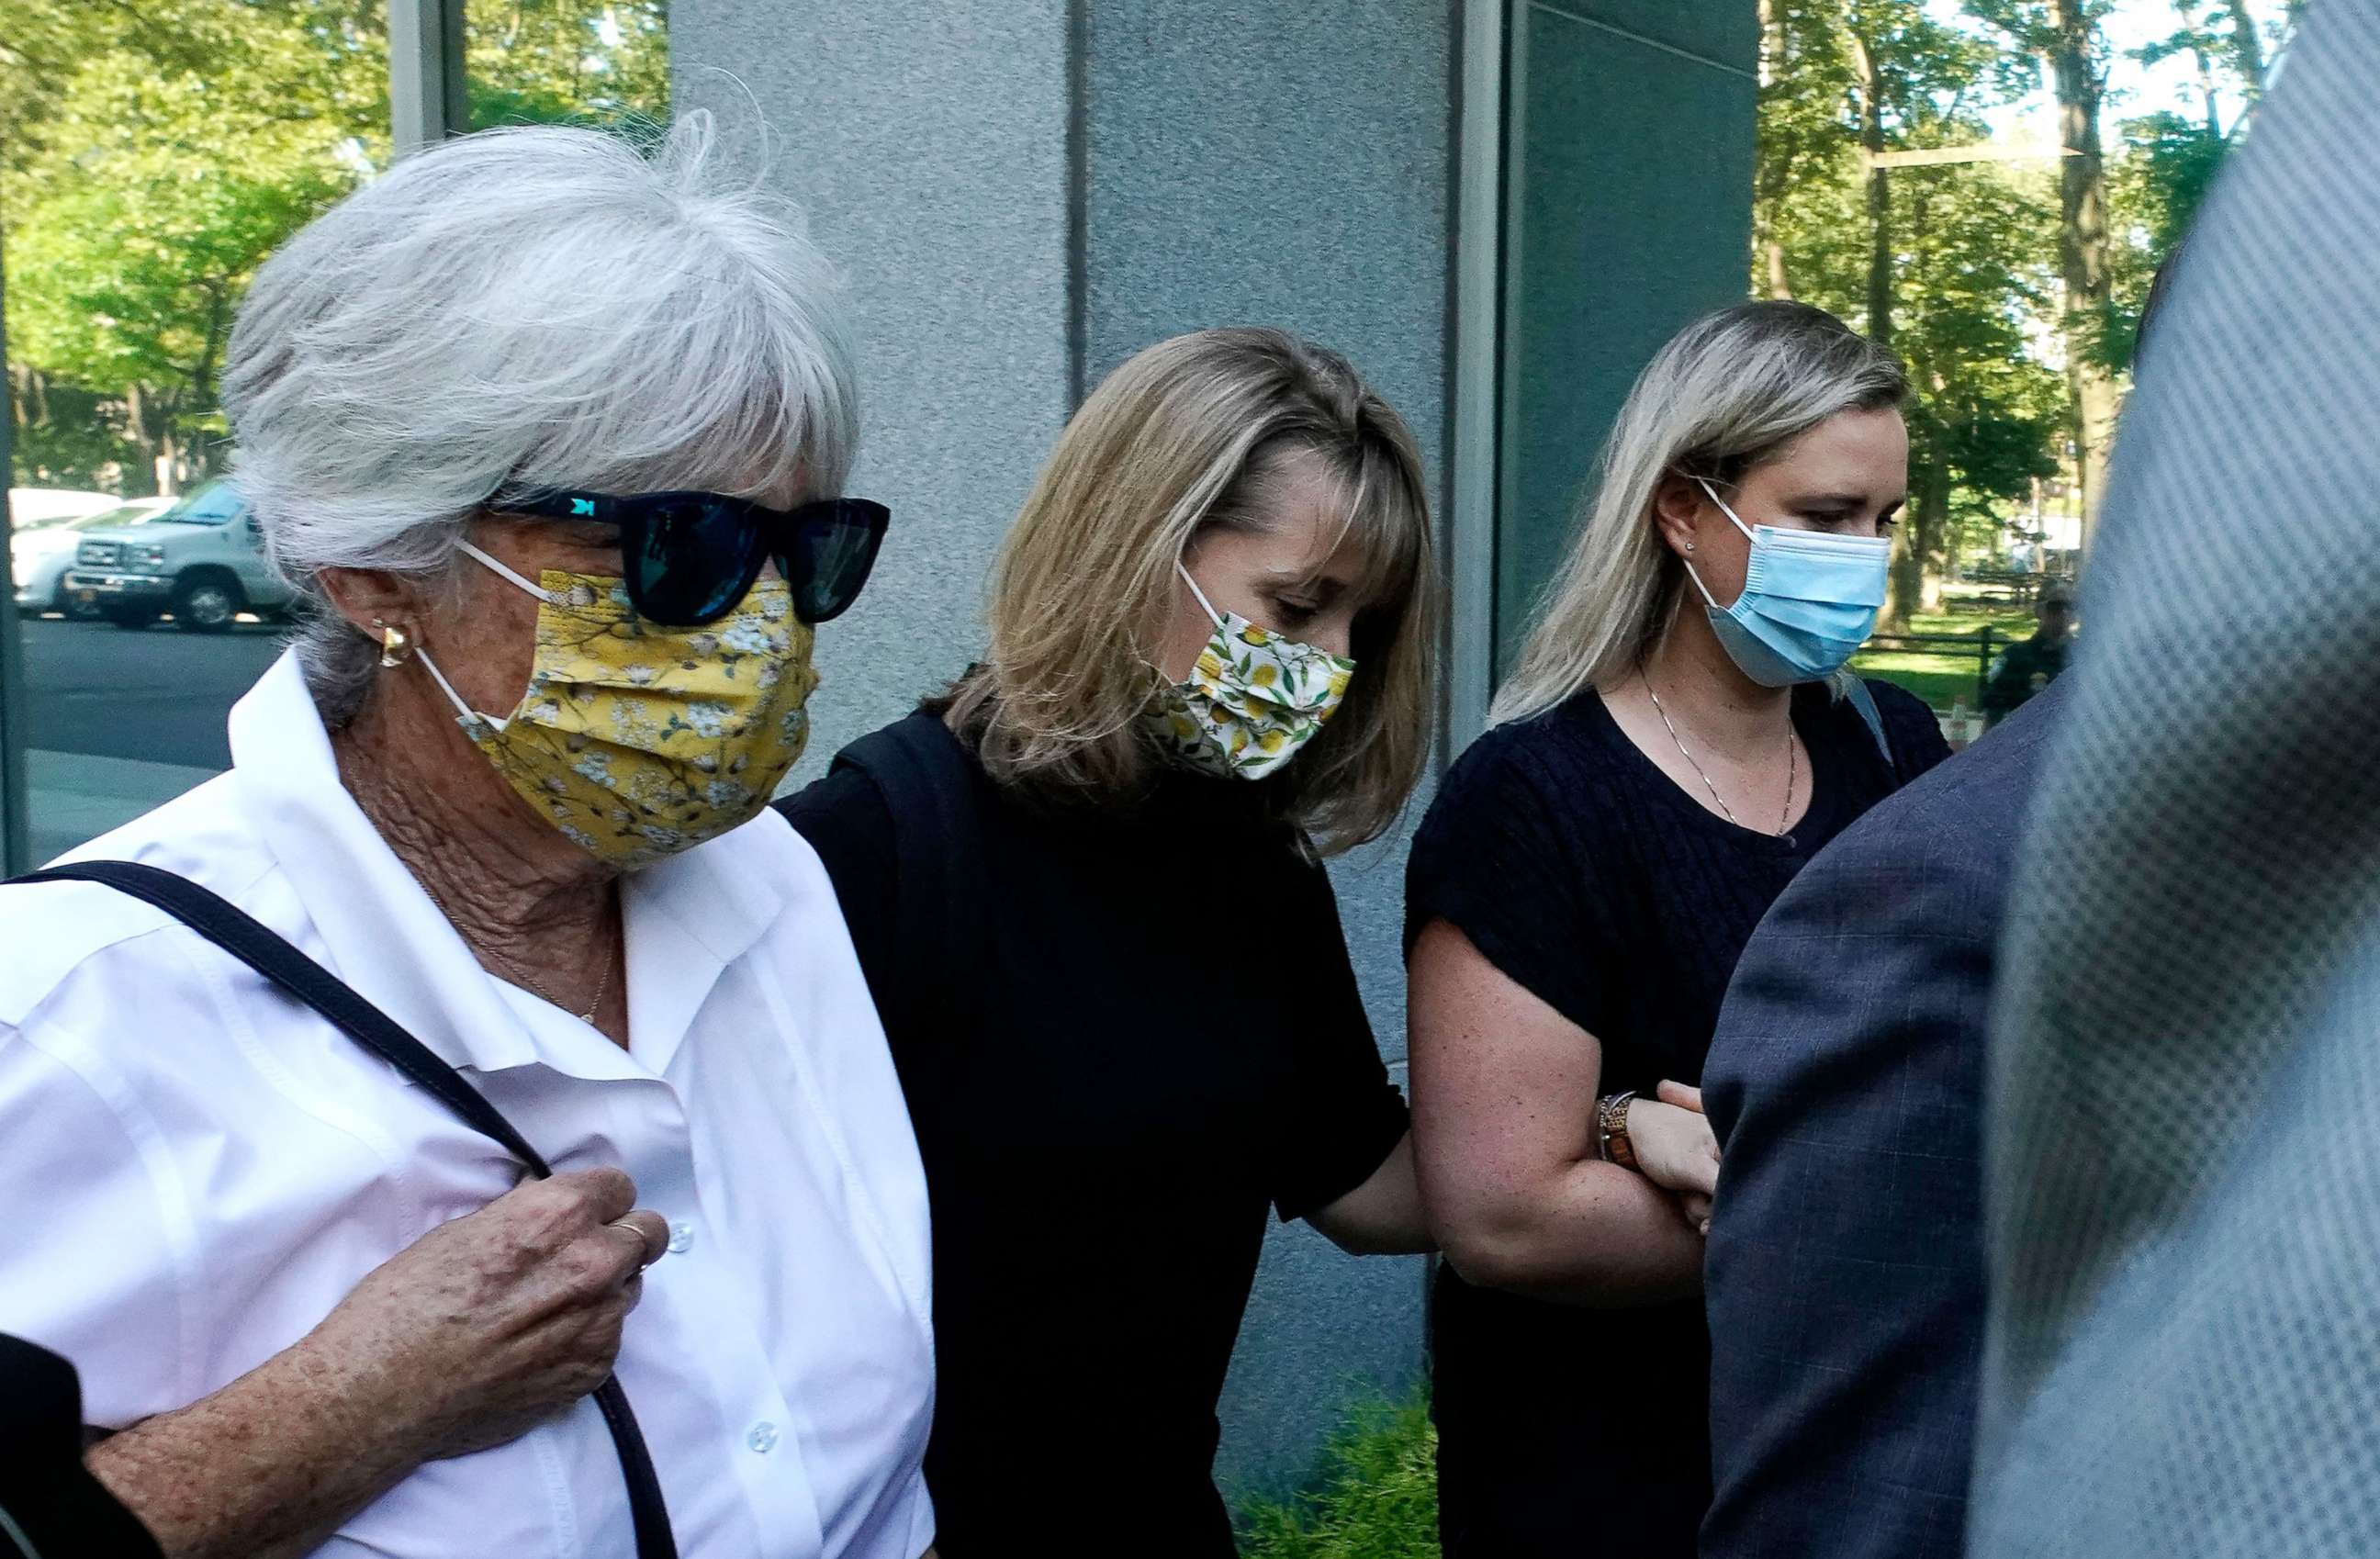 PHOTO: Allison Mack, center, arrives at Brooklyn Federal Court on June 30, 2021 in New York, to be sentenced for her role in the alleged sex cult NXIVM.